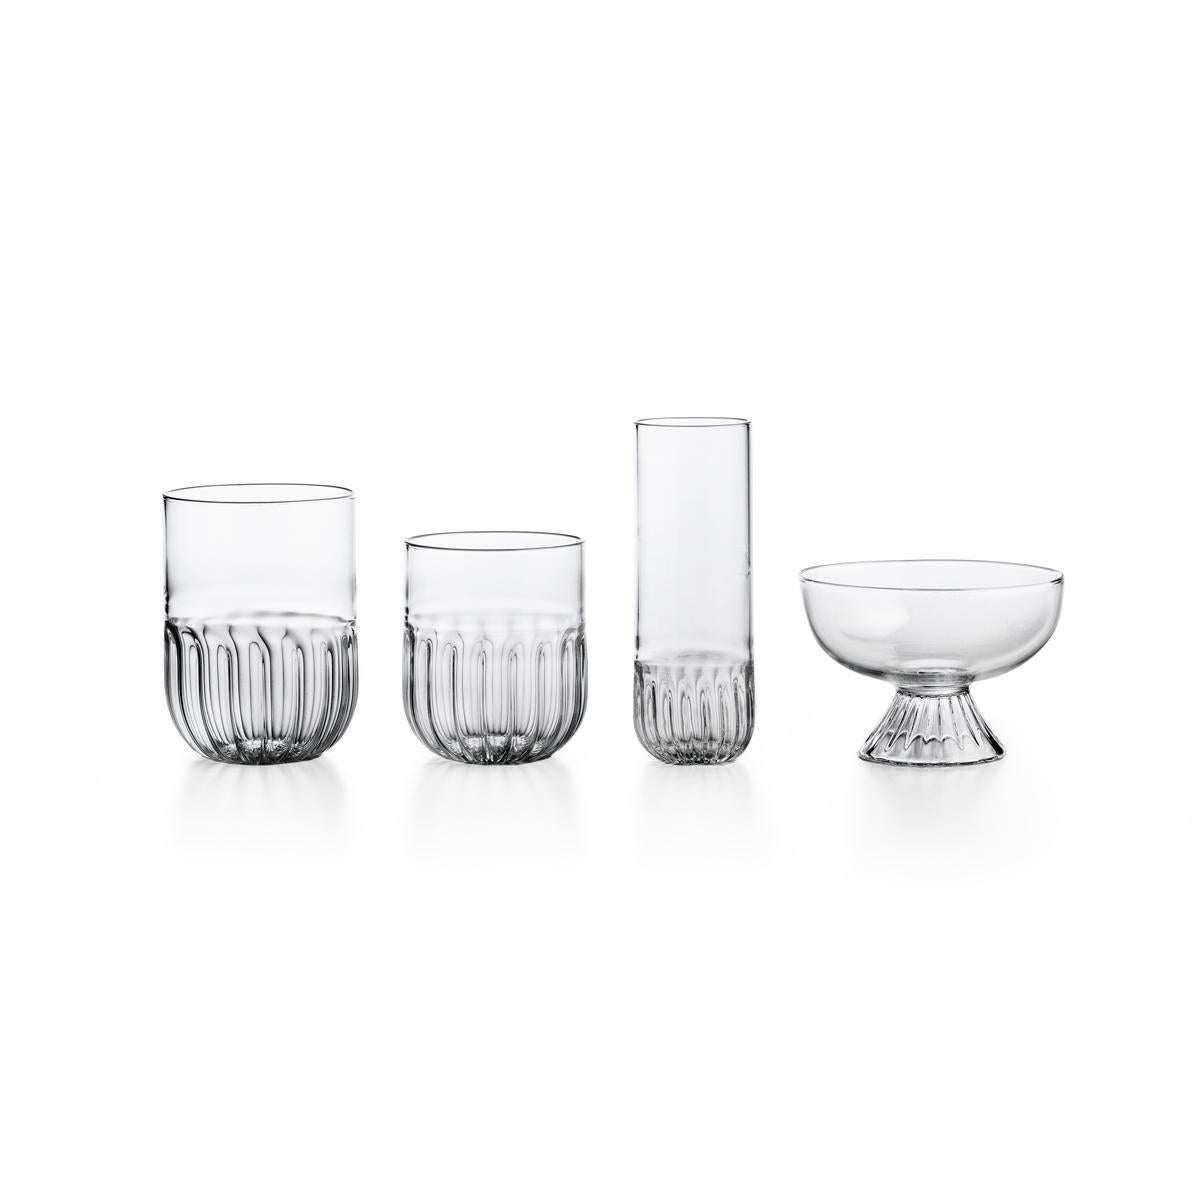 Mouth blown wine glass. The routine collection is a glassware family designed by Matteo Cibic, who define it as “an essential collection for a smart daily life”. All the pieces of Routine are handcrafted and feature a soft plissé motif at the base